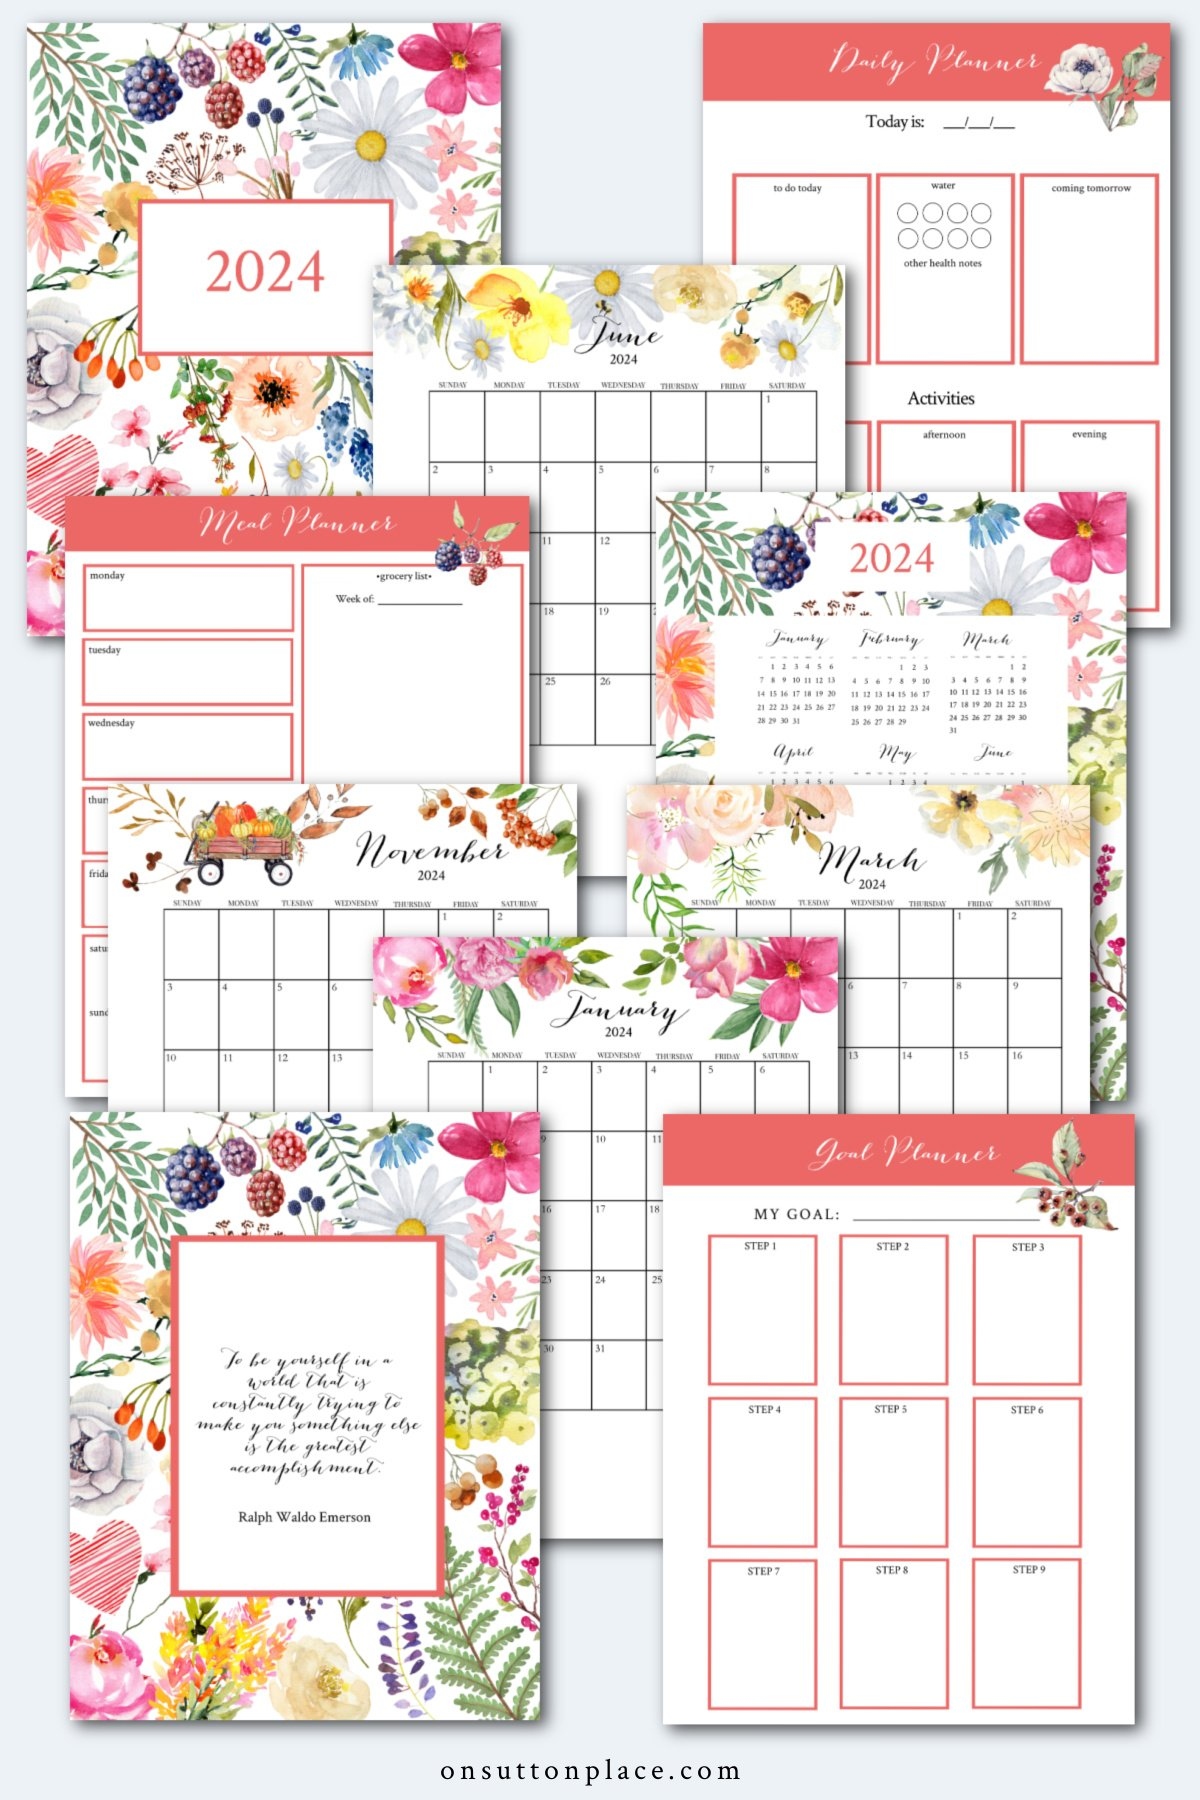 2024 Free Printable Calendar With Planner Pages - On Sutton Place with Free Printable Calendar 2024 Planner